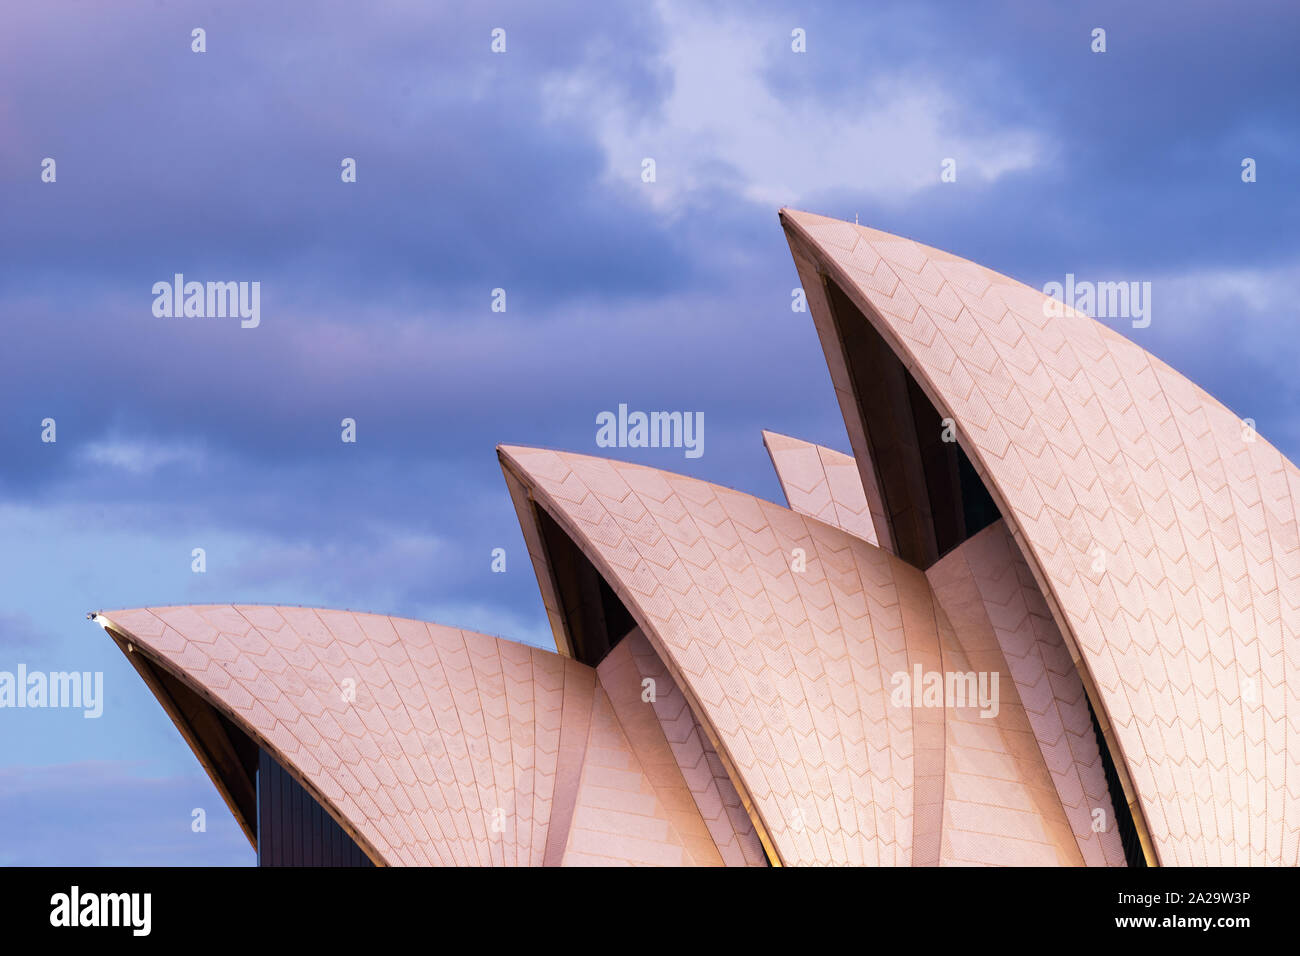 The Opera House in Sydney, New South Wales, Australia Stock Photo